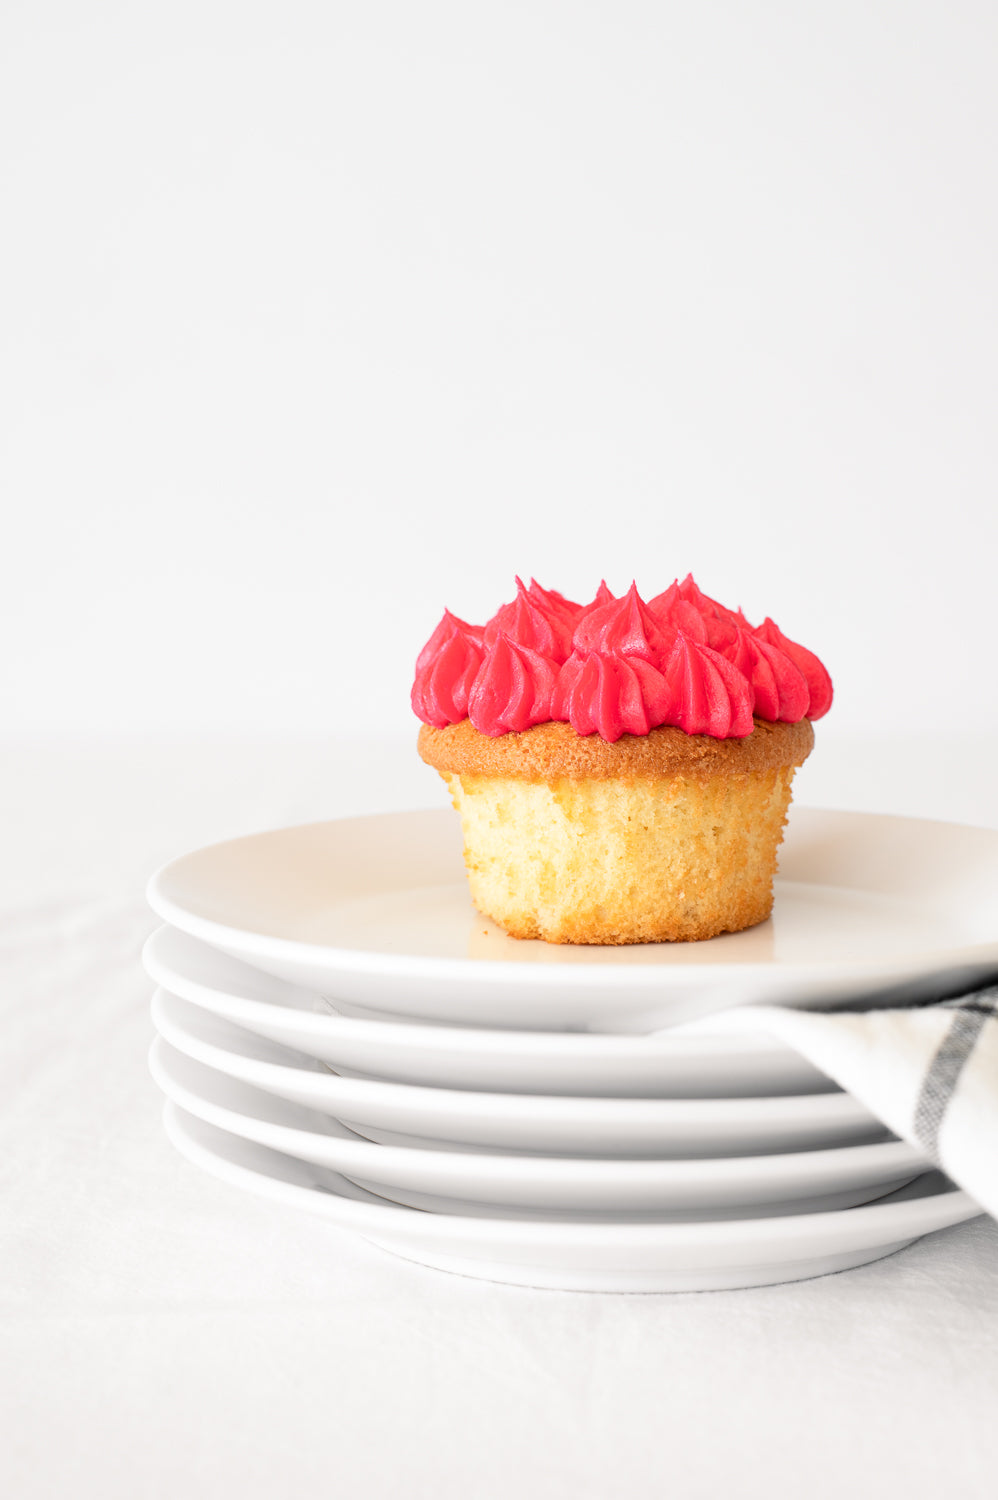 A stack of plates holding a vanilla cupcake with pink piped icing